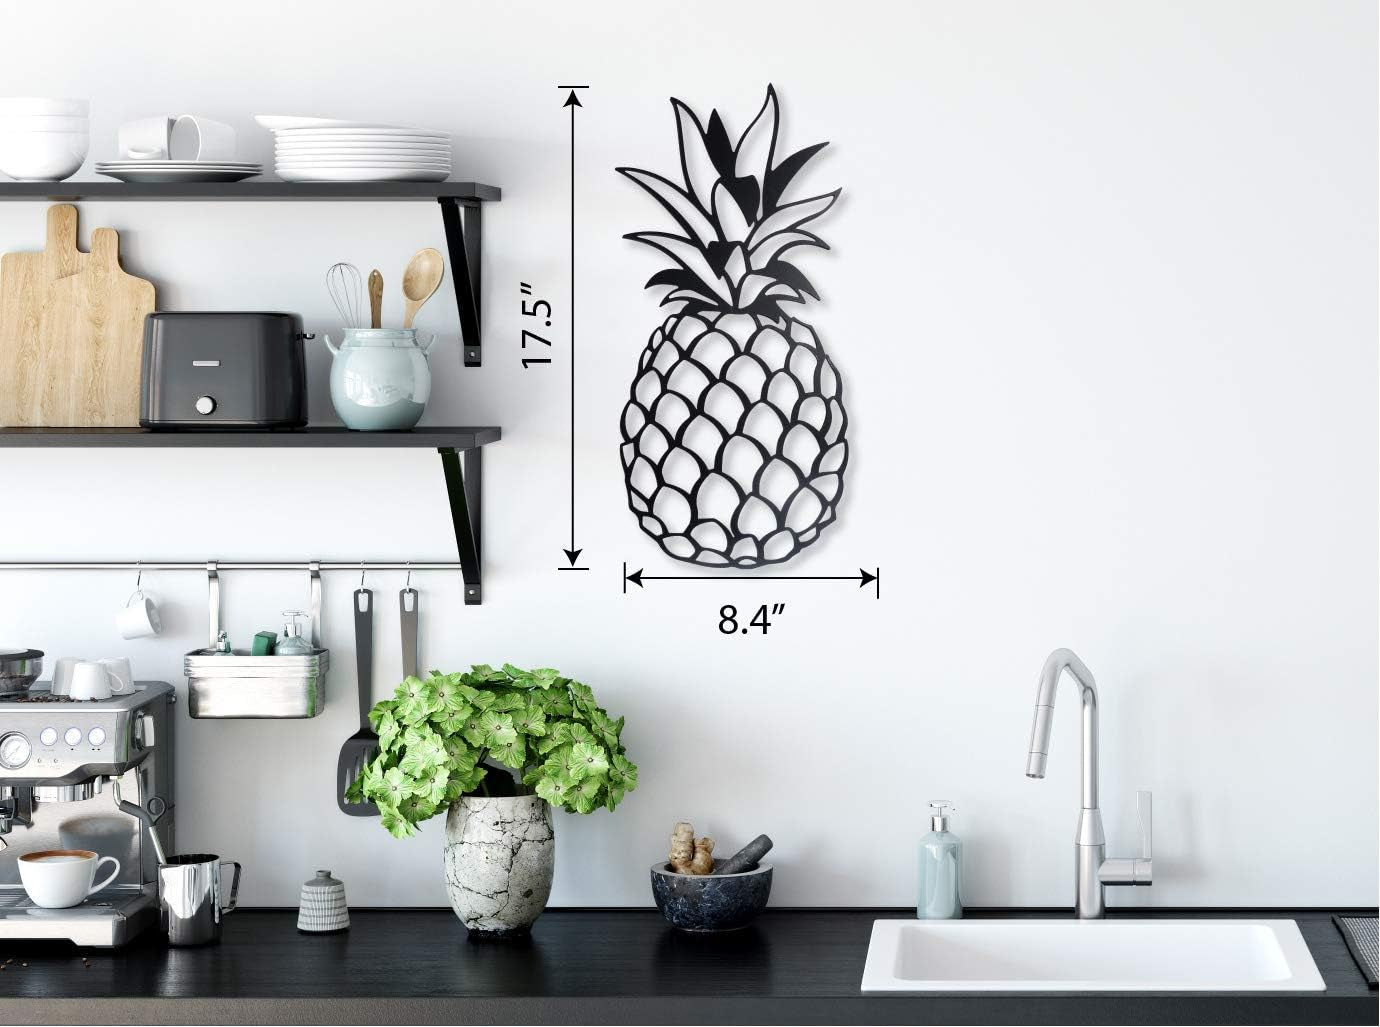 Metal Pineapple Wall Decor, Tropical Pineapple Art Wall Hanging Home Outdoor Decorations for Kitchen Bathroom Bedroom and Living Room (Black)